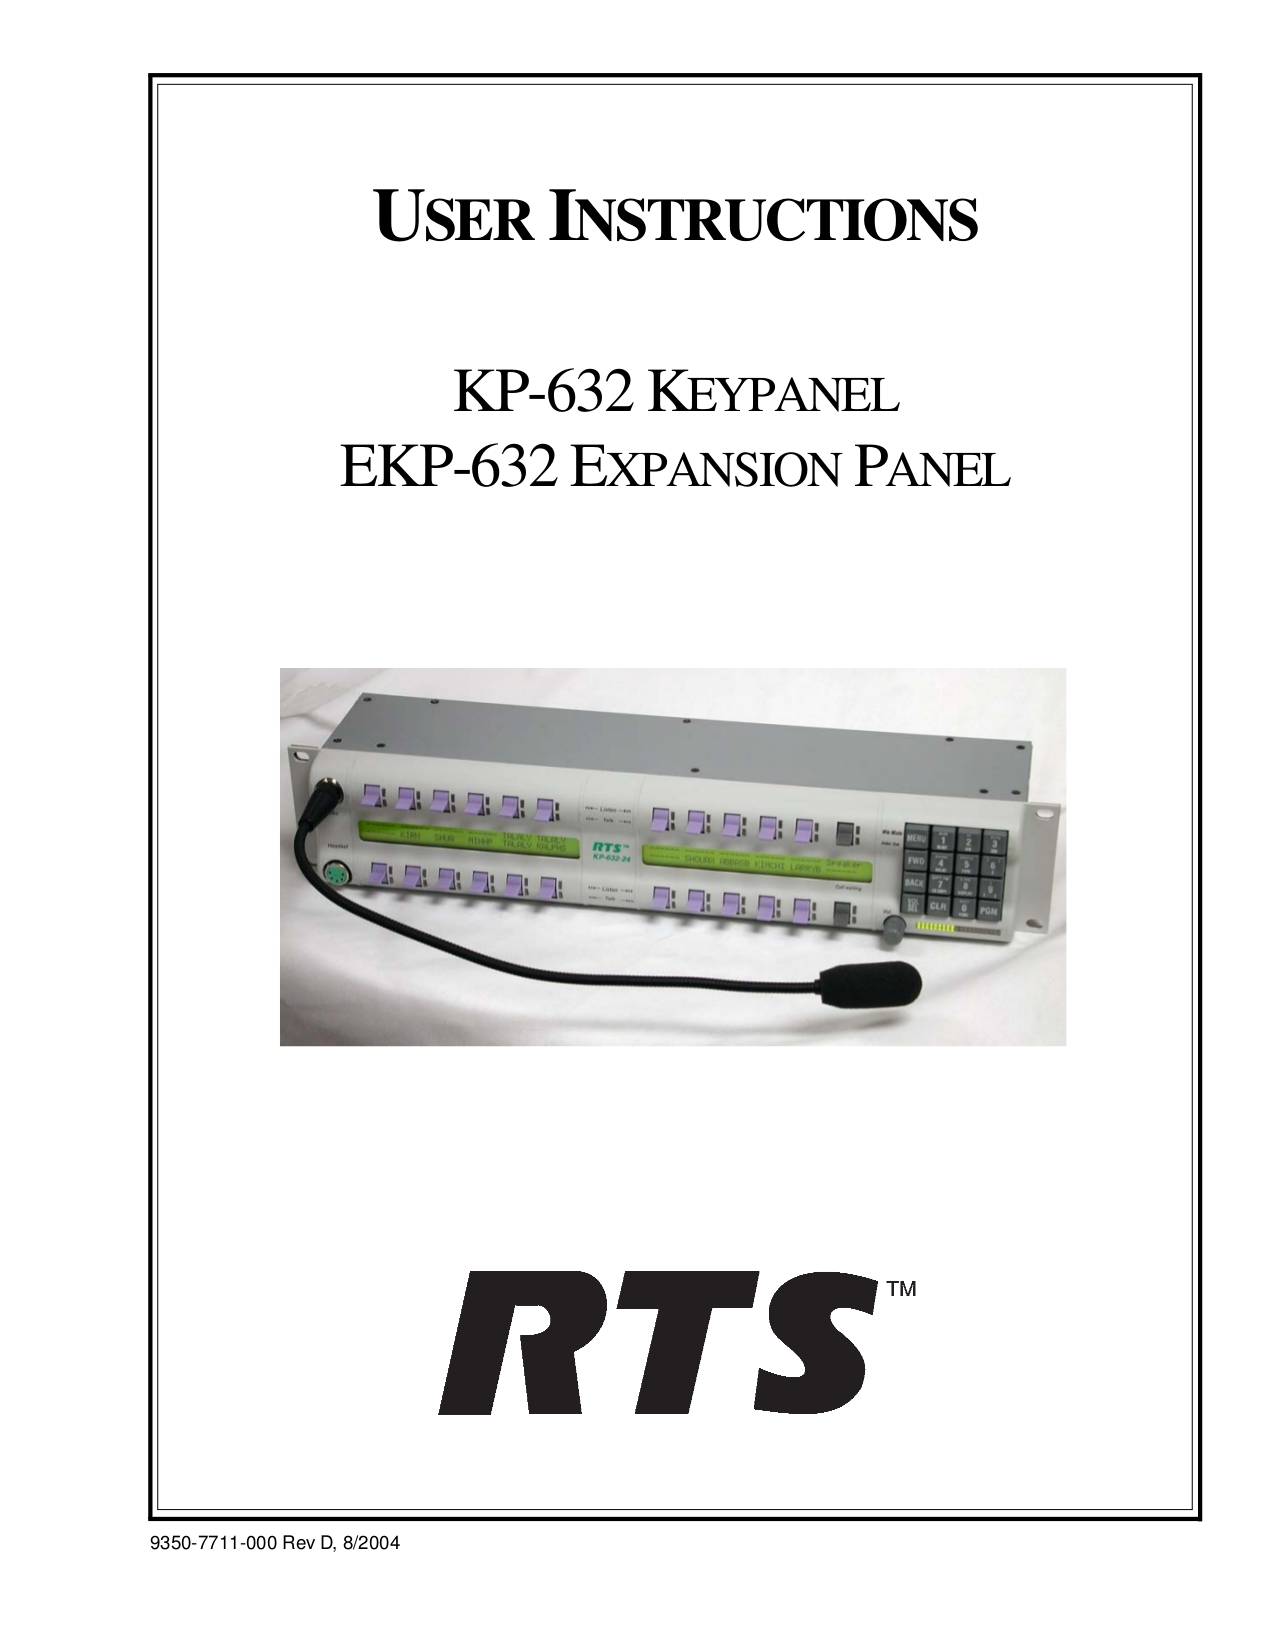 pdf for Telex Other KP-96 IntercomSystem manual